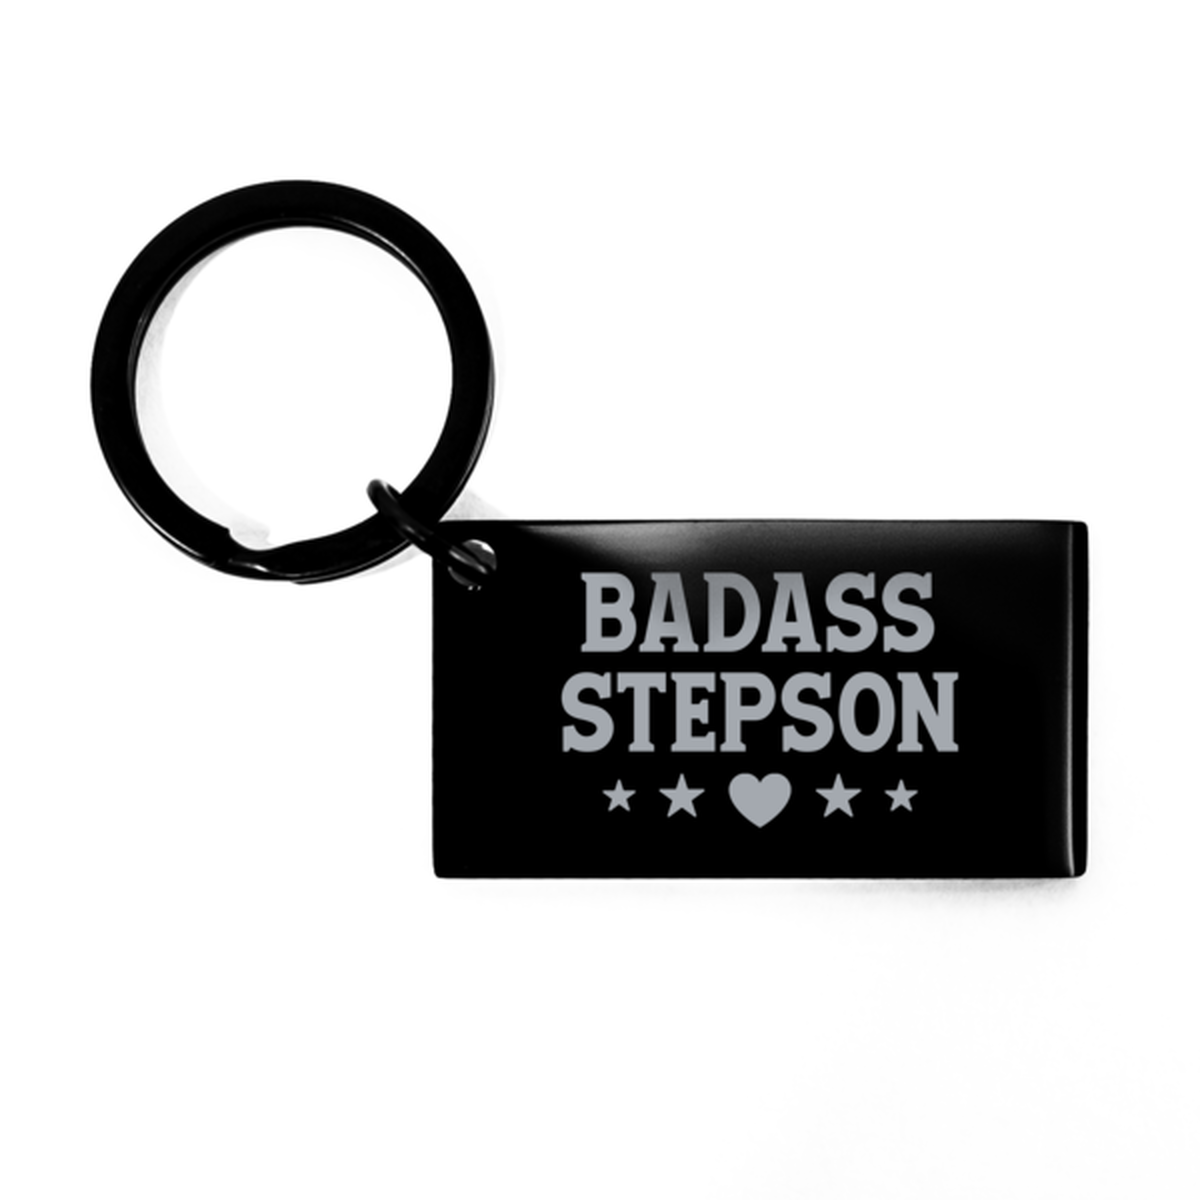 Stepson Black Keychain, Badass Stepson, Funny Family Gifts  Keyring For Stepson From Dad Mom